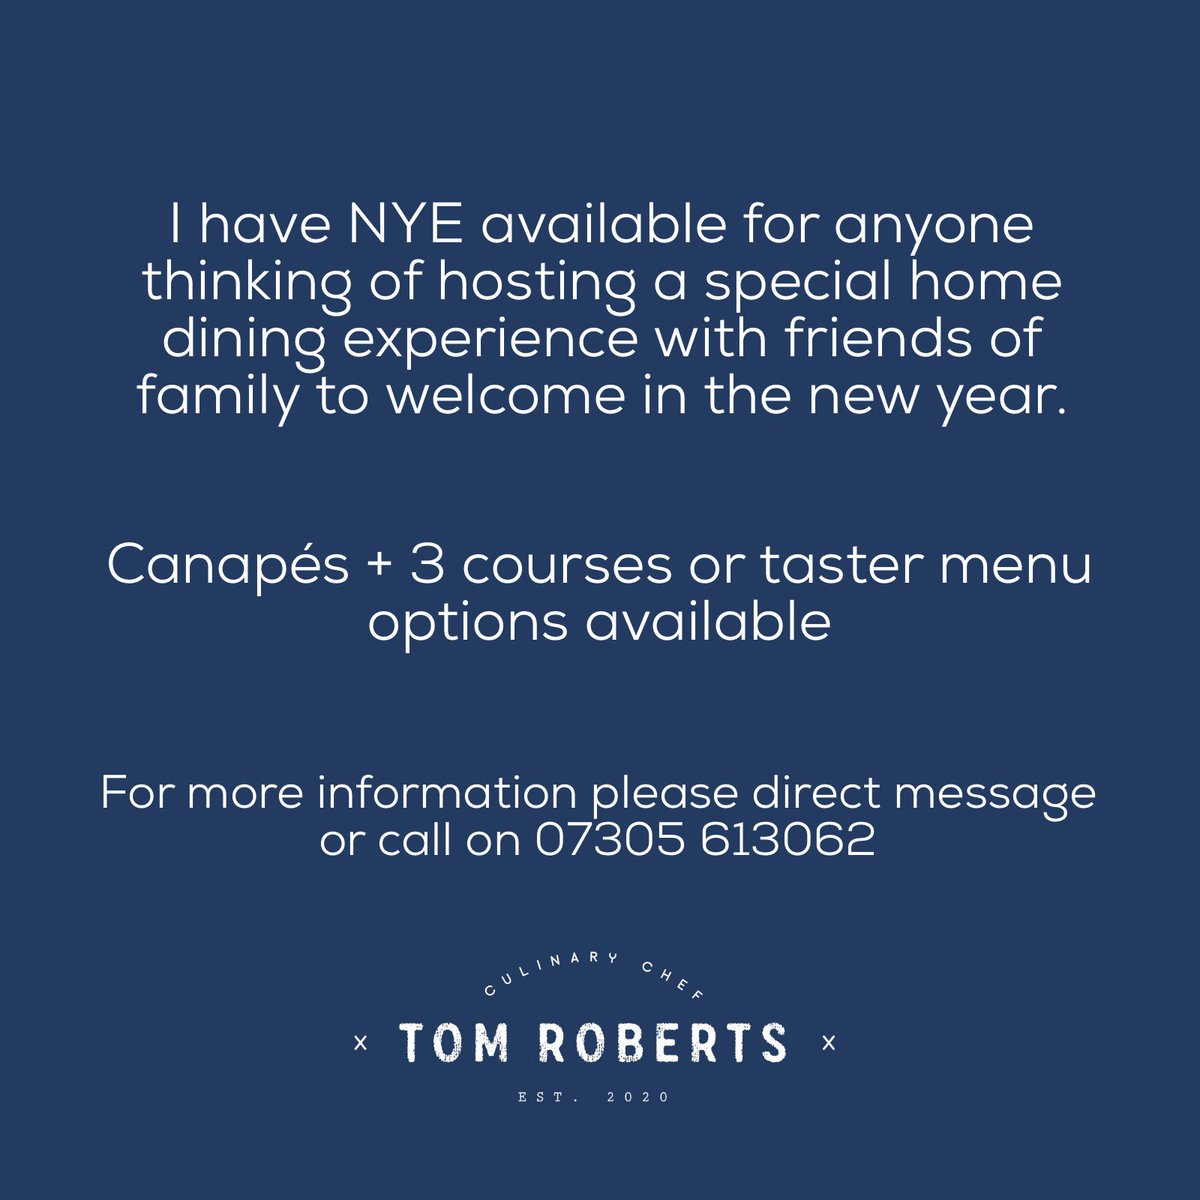 NYE available for booking!

#privatechef #chef #manchester #dinnerparty #NYE #privatedining #newyear